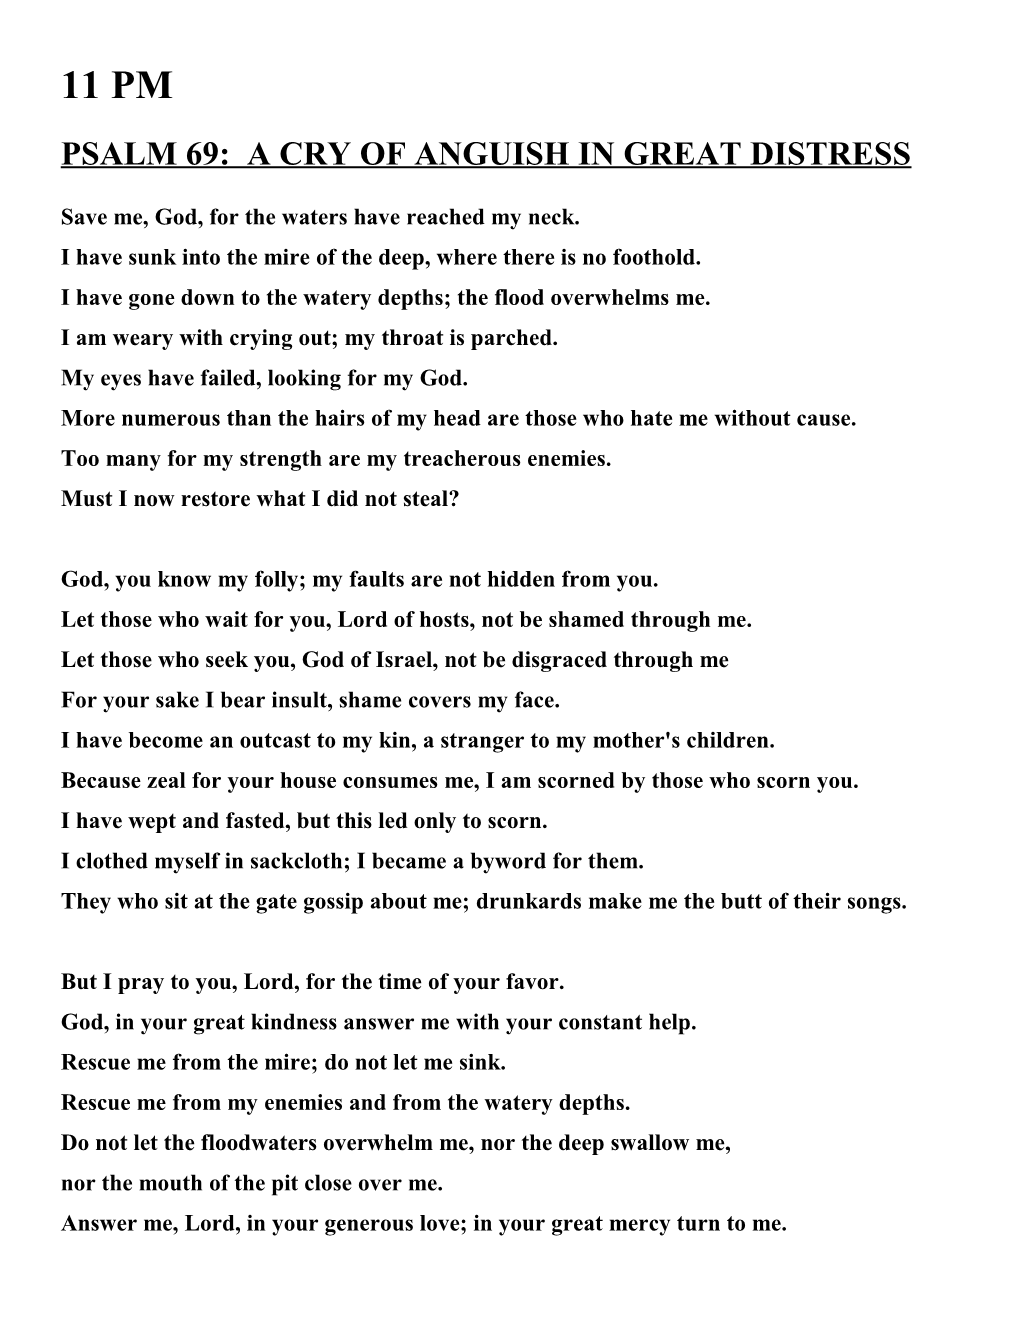 Psalm 69: a Cry of Anguish in Great Distress